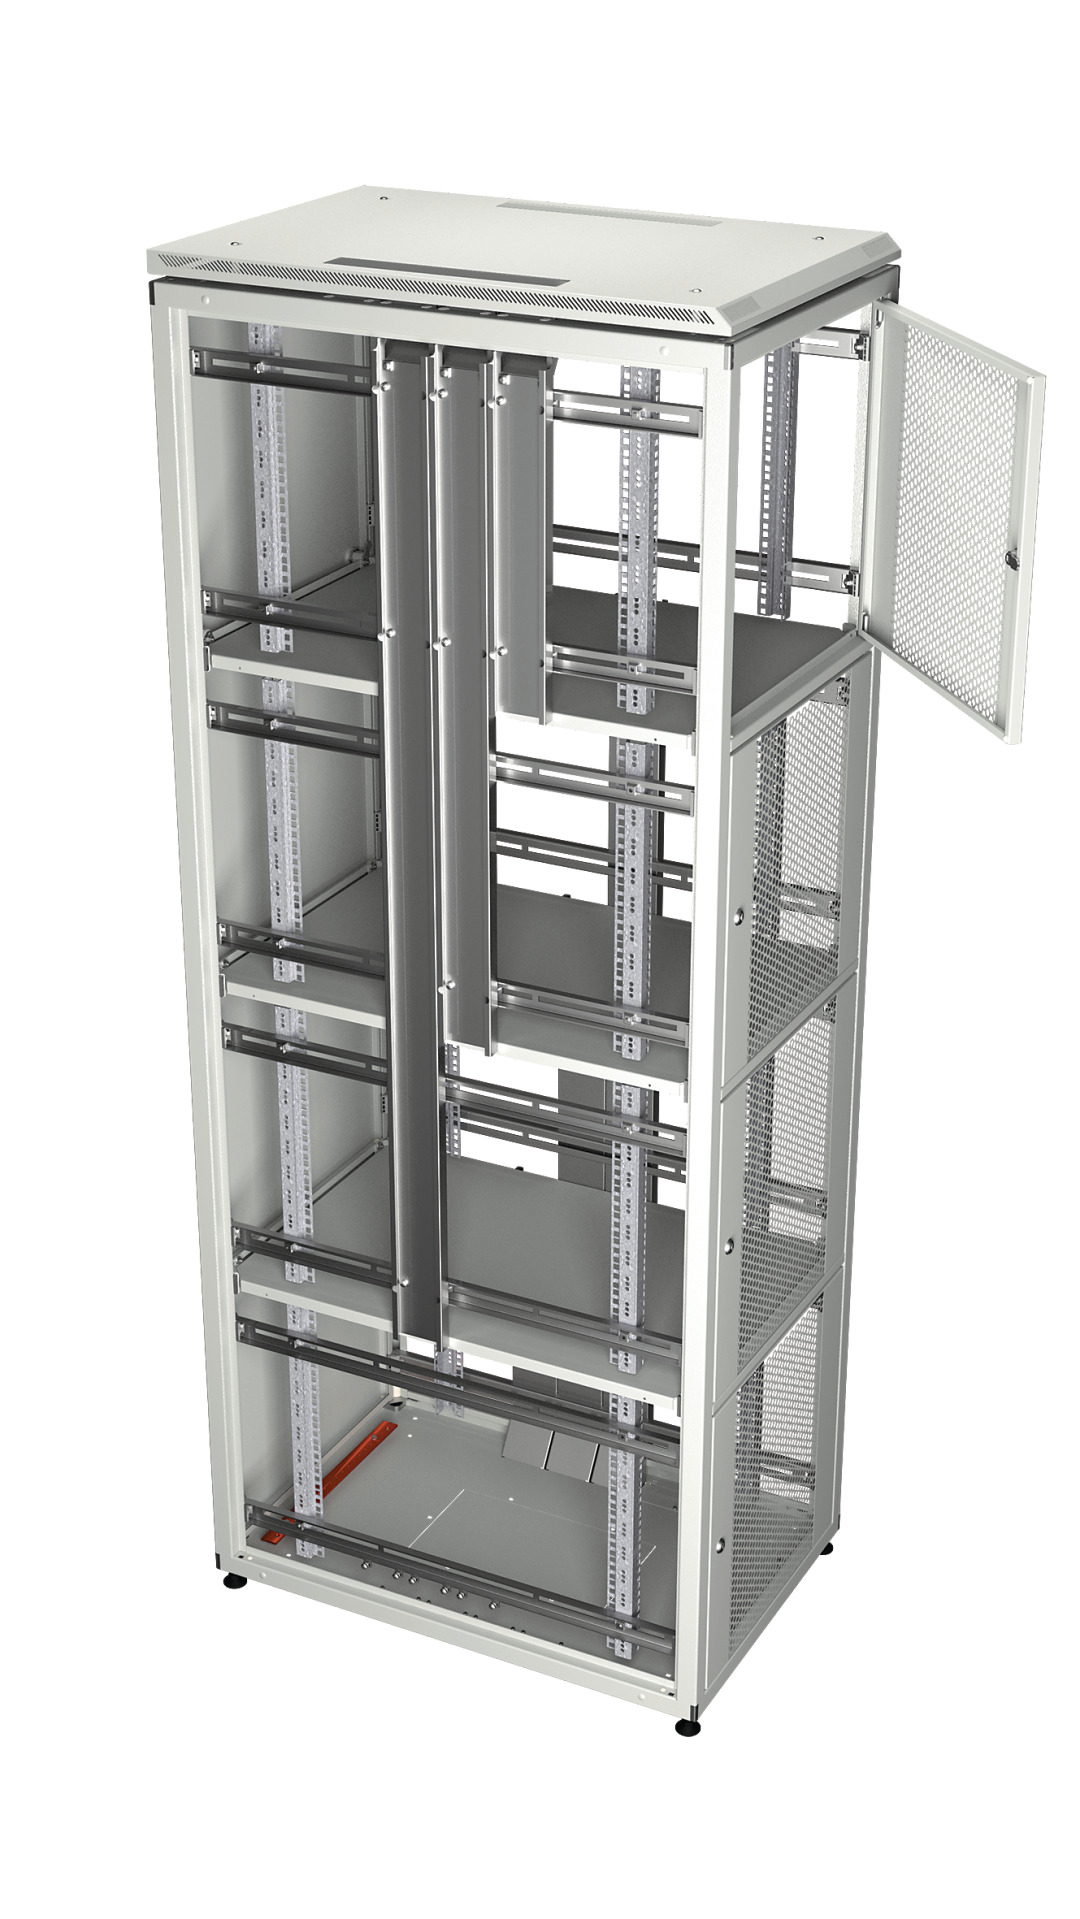 Co-Location Rack PRO, 4 x 9HE, 600x1000 mm, F+R 1-tlg. perforiert, RAL9005